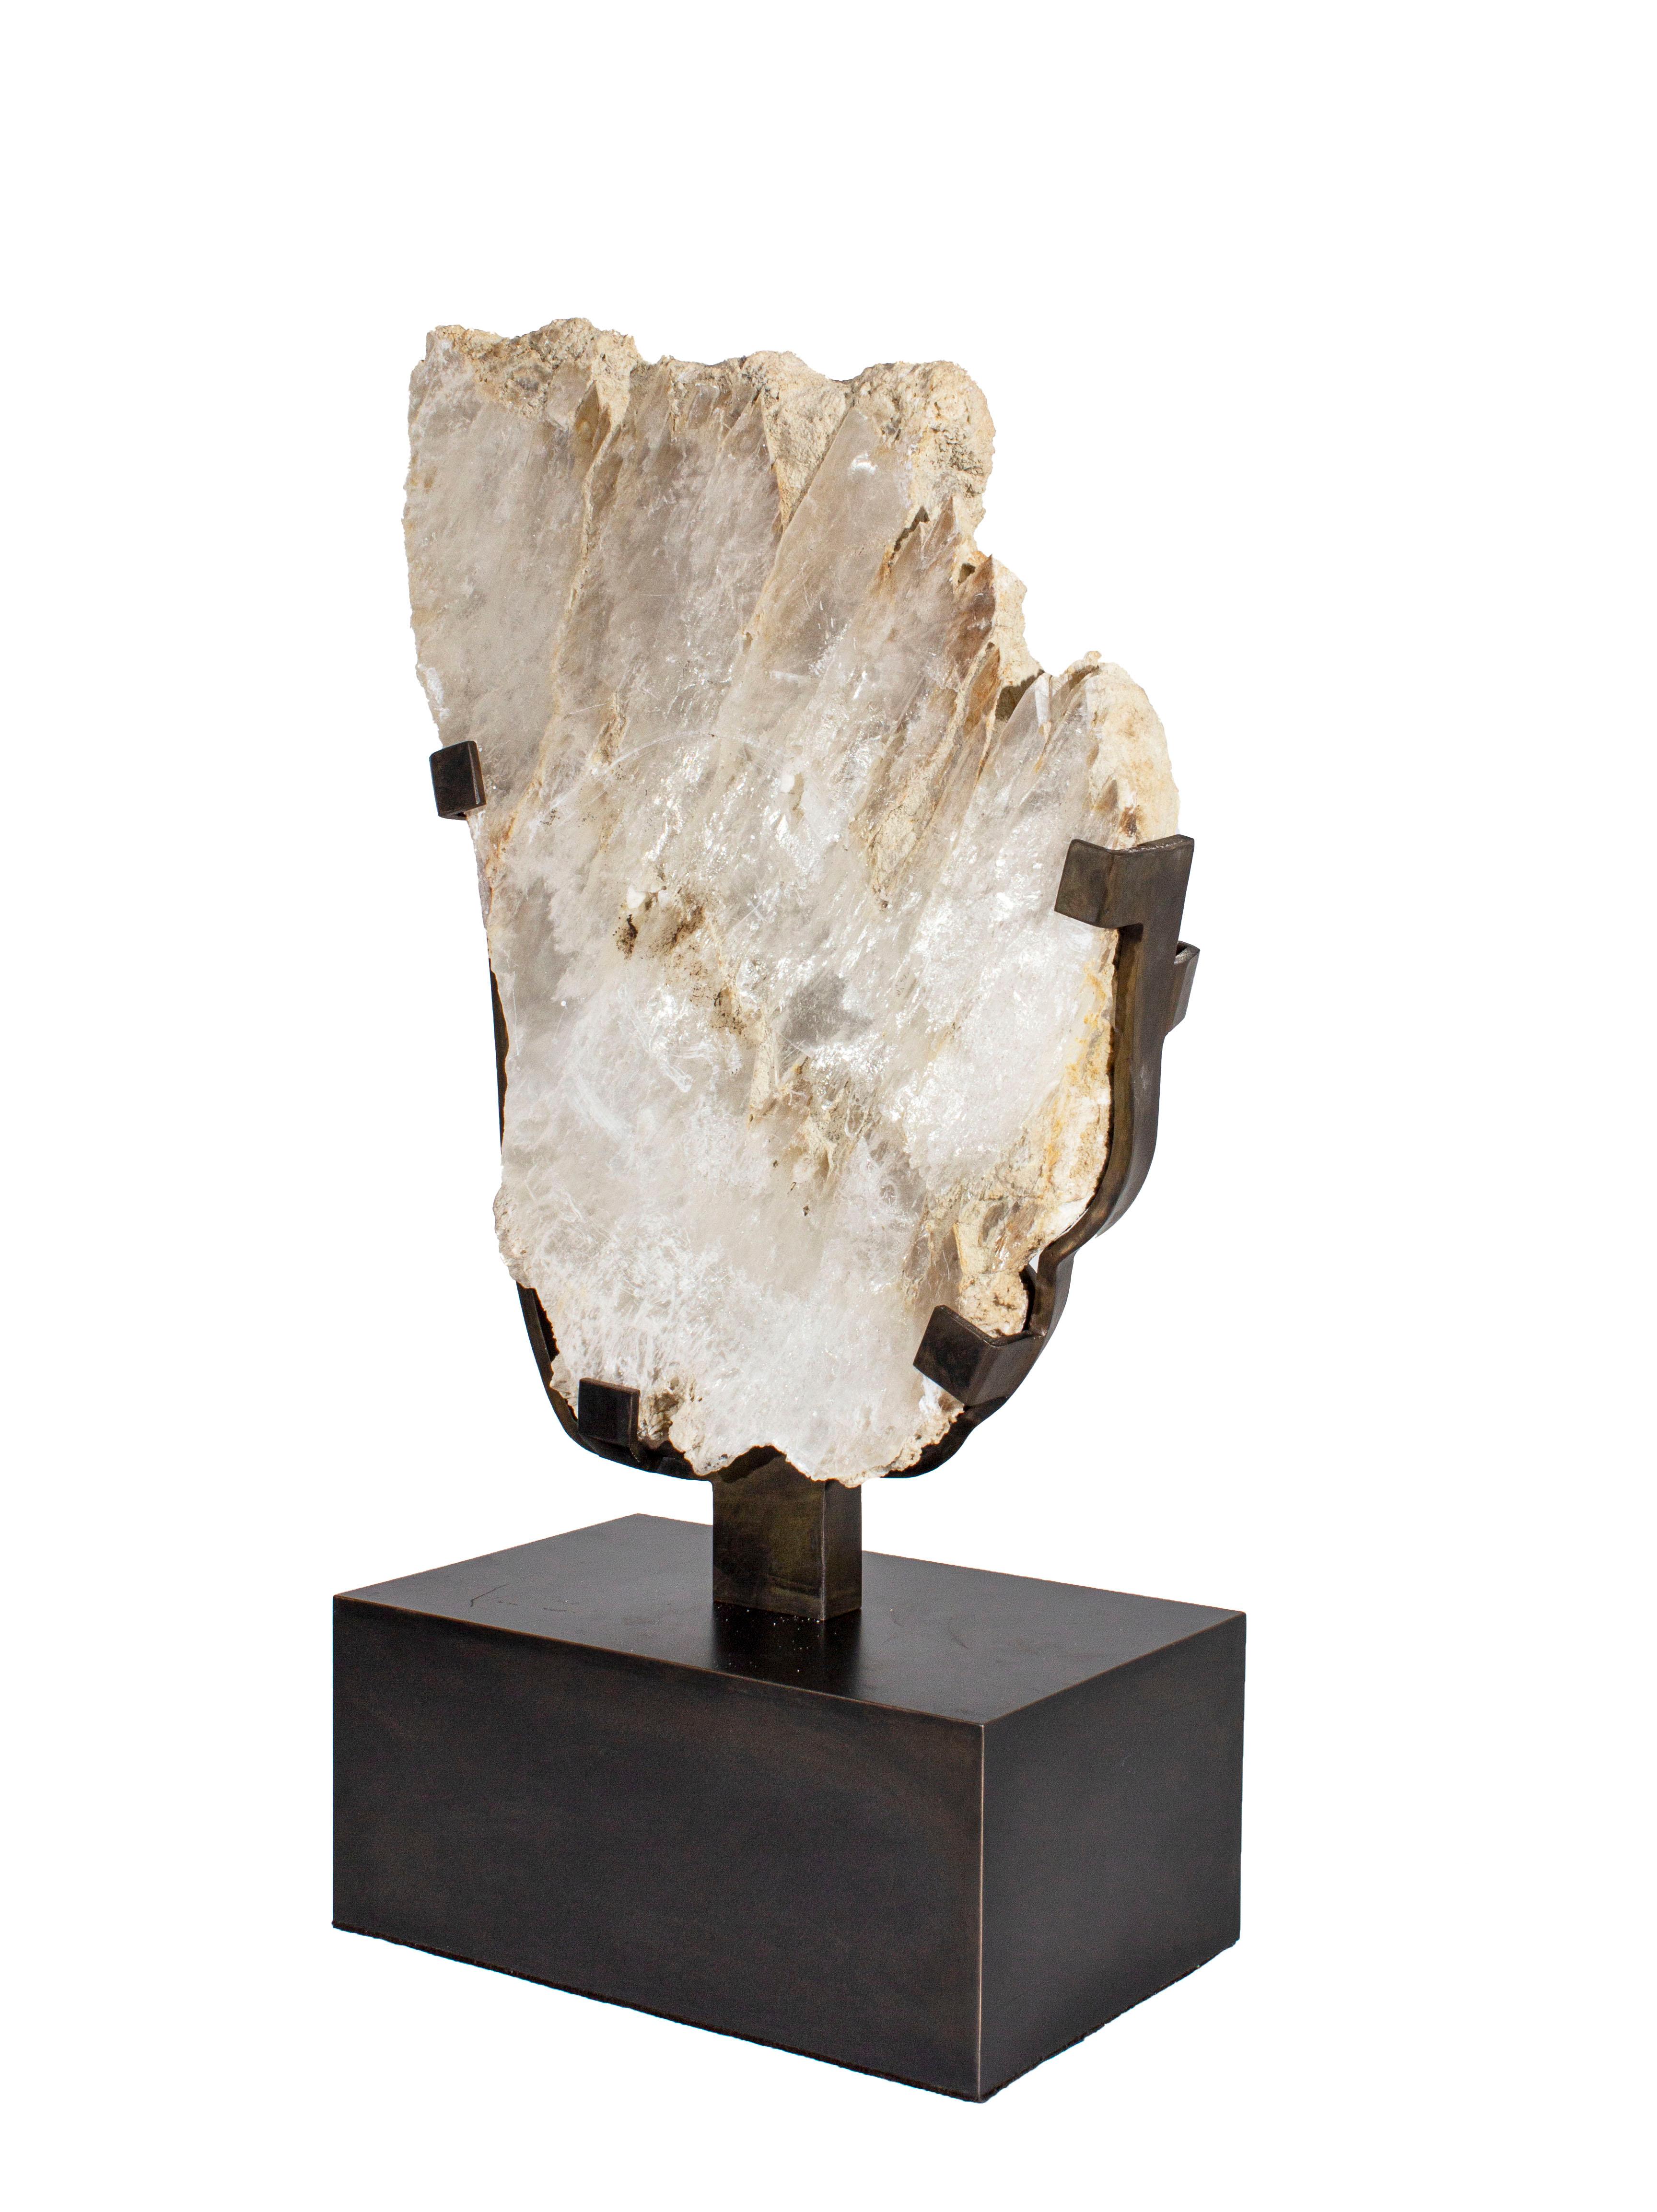 Selenite sculpture on museum mount

Selenite sourced from New Mexico. Iron base made here in the Dallas Design District by local artisans.

Base 9